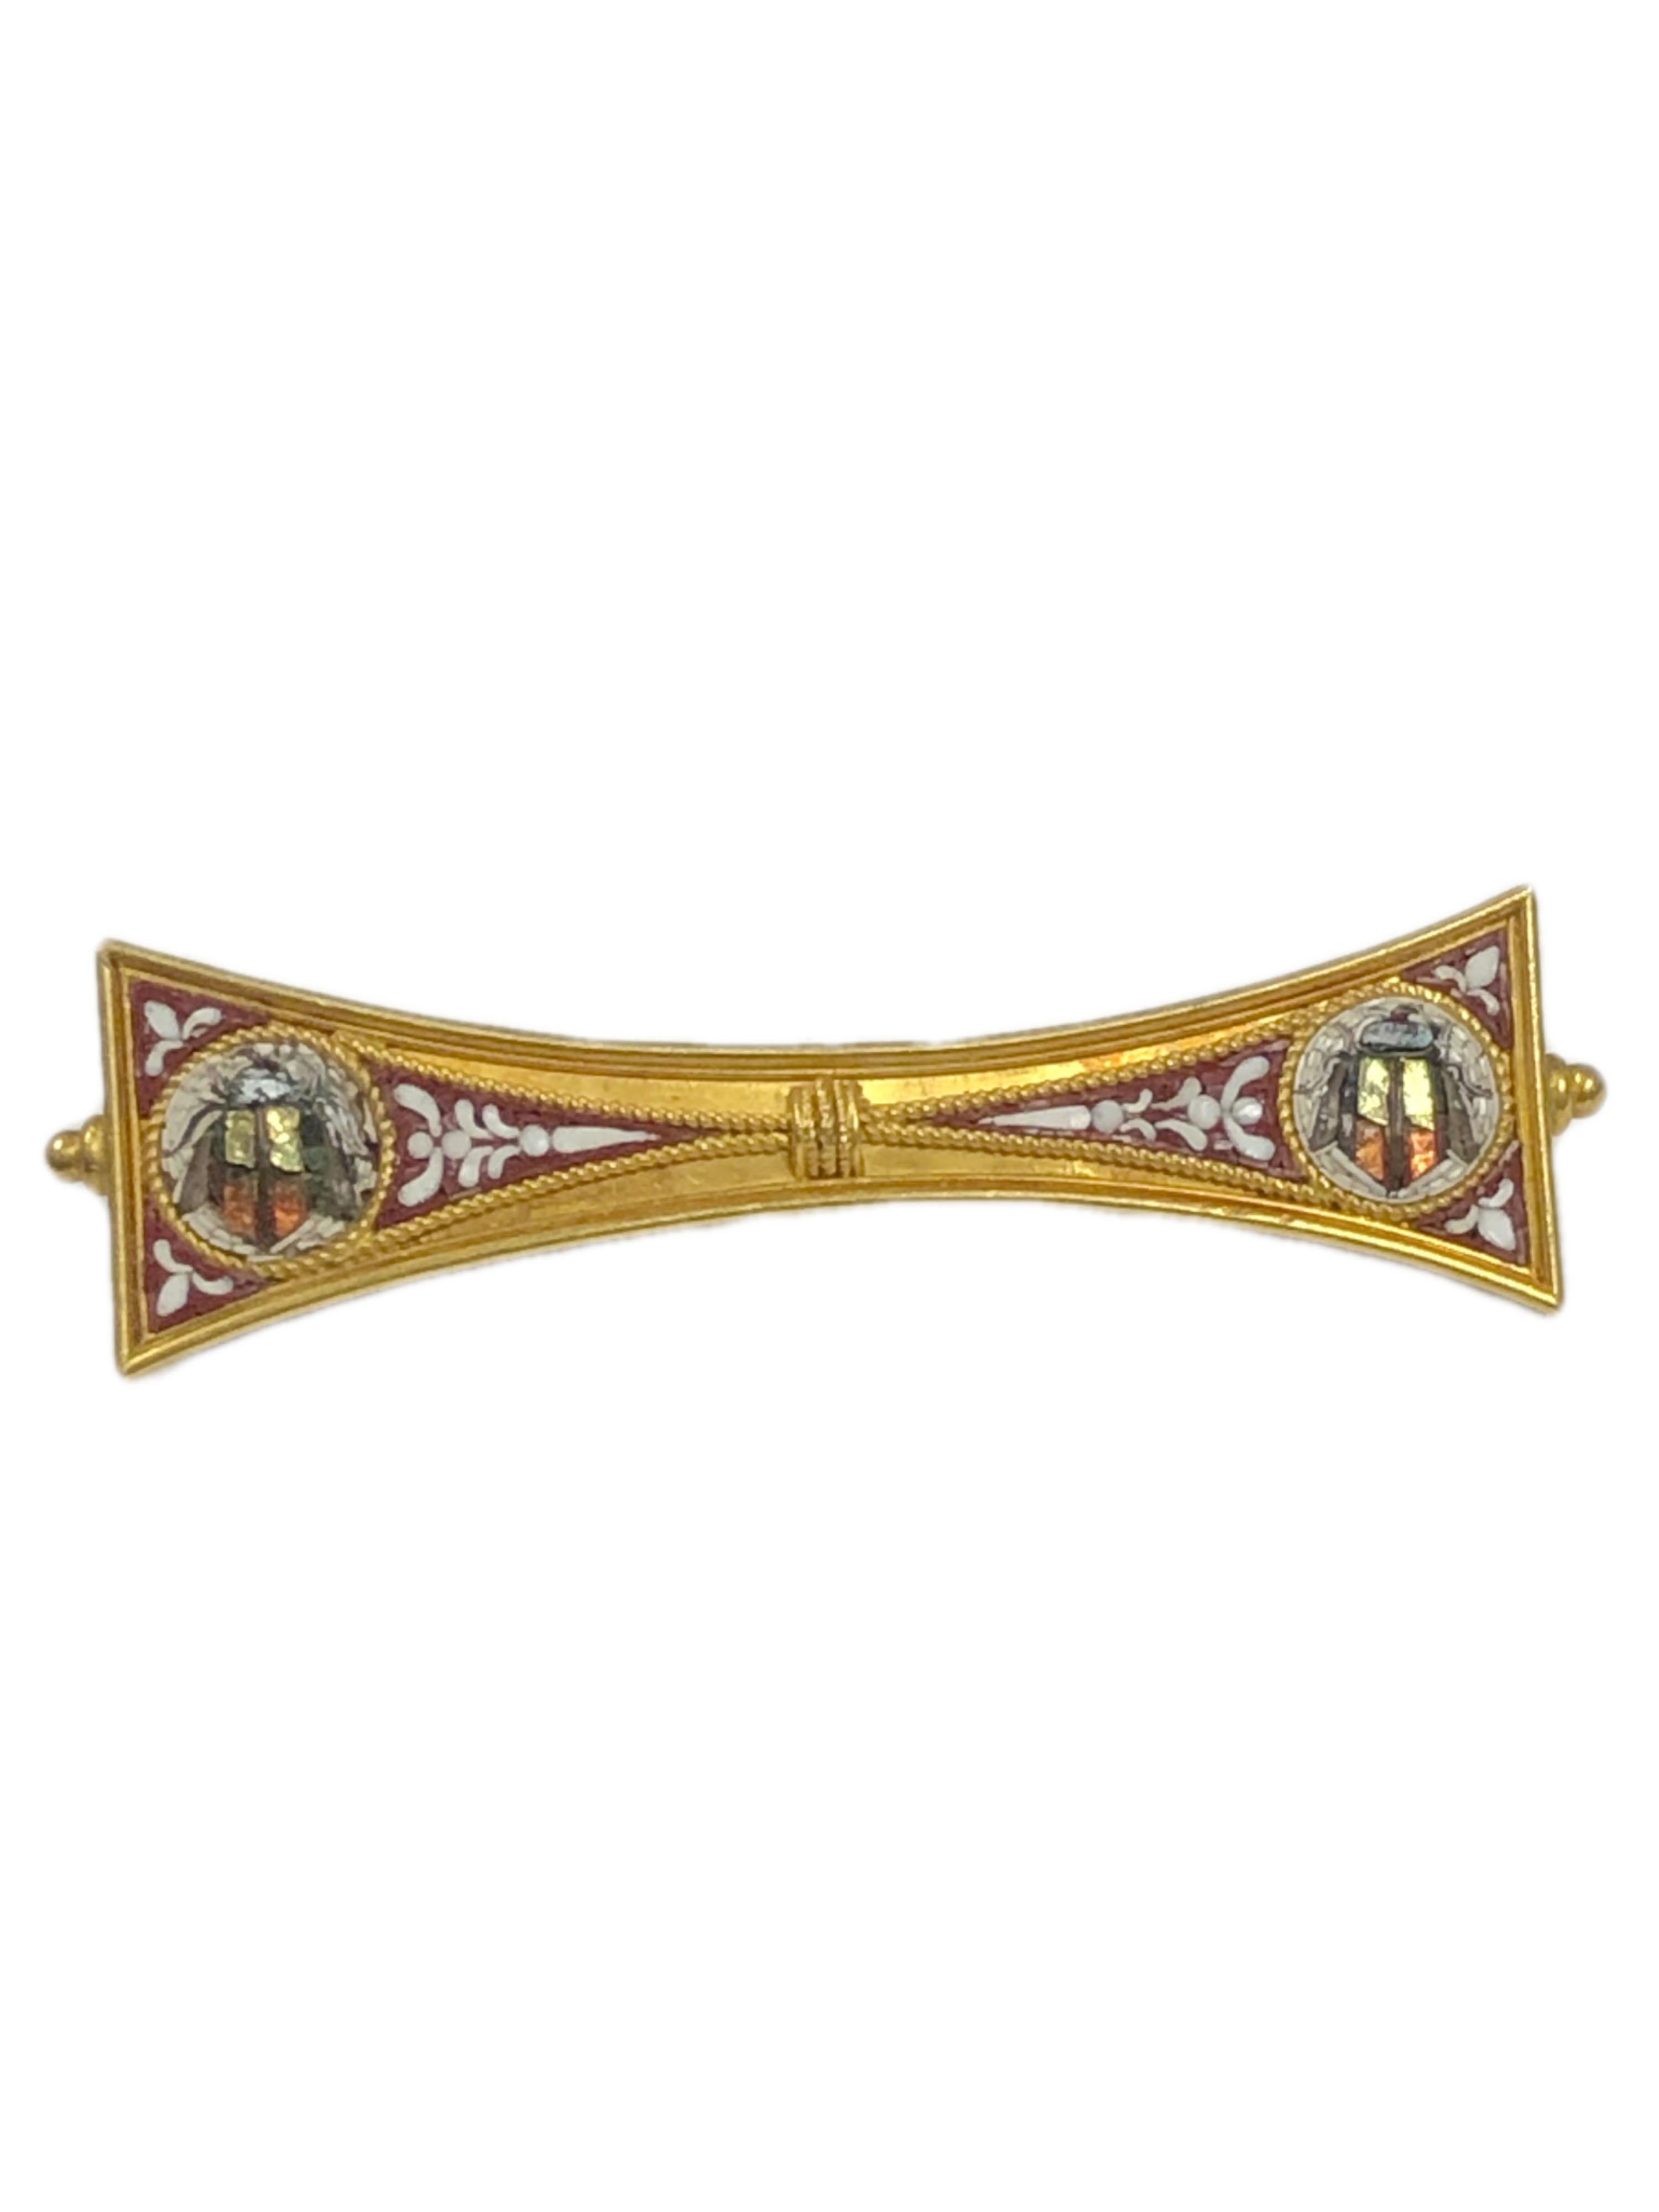 Circa 1890 14K Yellow Gold Micro Mosaic, Etruscan Revival Brooch, Measuring 2 1/8 inches in length and 9/16 inch wide, masterfully set with Glass Mosaic pieces forming winged Beatles a typical theme of these types of pieces also have fine wire and